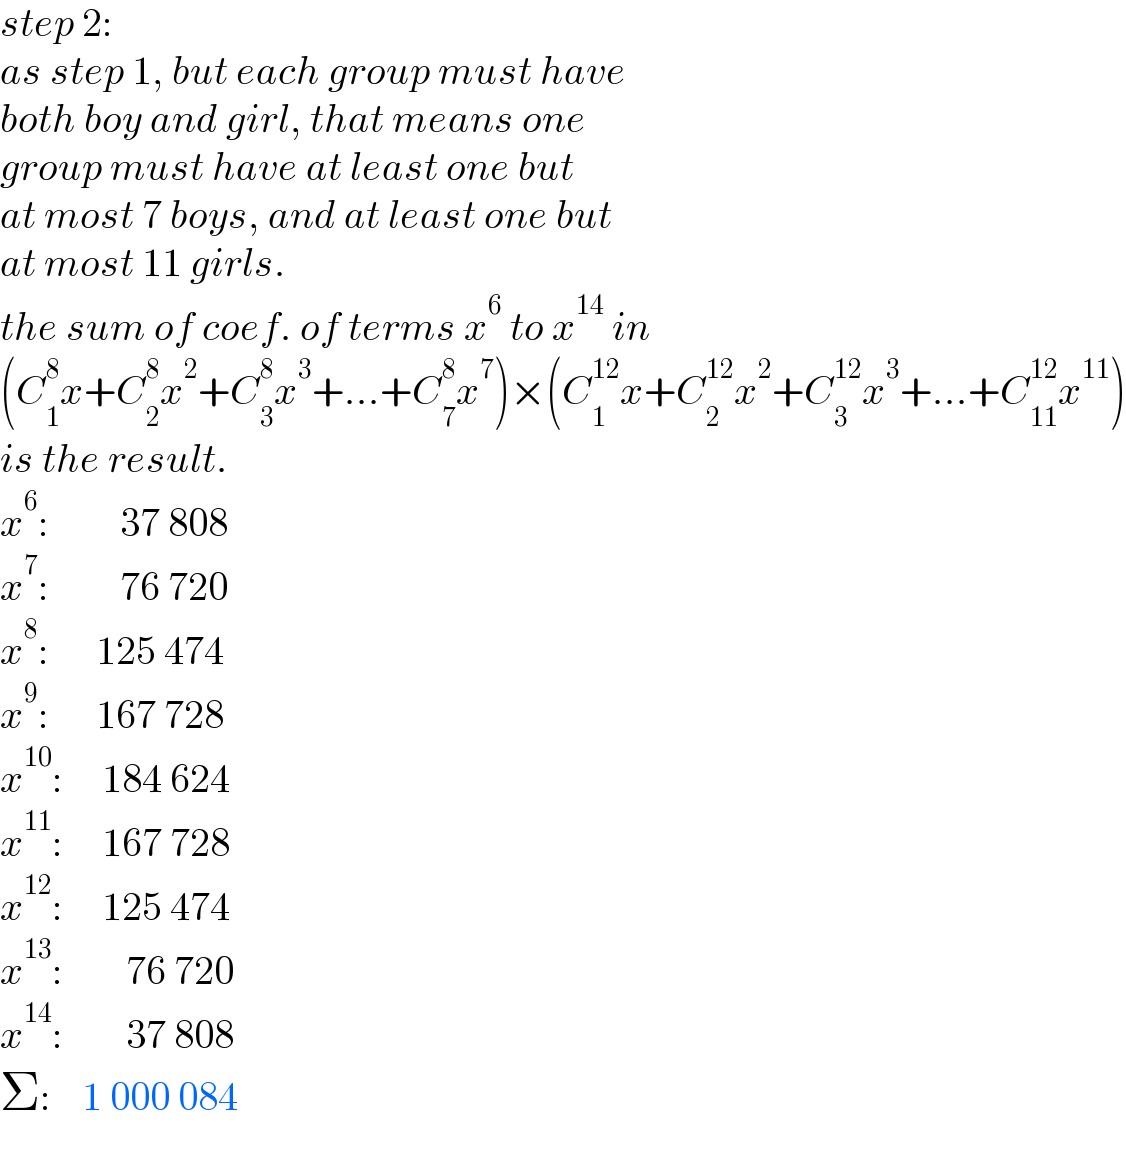 step 2:  as step 1, but each group must have  both boy and girl, that means one  group must have at least one but  at most 7 boys, and at least one but  at most 11 girls.  the sum of coef. of terms x^6  to x^(14)  in  (C_1 ^8 x+C_2 ^8 x^2 +C_3 ^8 x^3 +...+C_7 ^8 x^7 )×(C_1 ^(12) x+C_2 ^(12) x^2 +C_3 ^(12) x^3 +...+C_(11) ^(12) x^(11) )  is the result.  x^6 :         37 808  x^7 :         76 720  x^8 :      125 474  x^9 :      167 728  x^(10) :     184 624  x^(11) :     167 728  x^(12) :     125 474  x^(13) :        76 720  x^(14) :        37 808  Σ:    1 000 084  